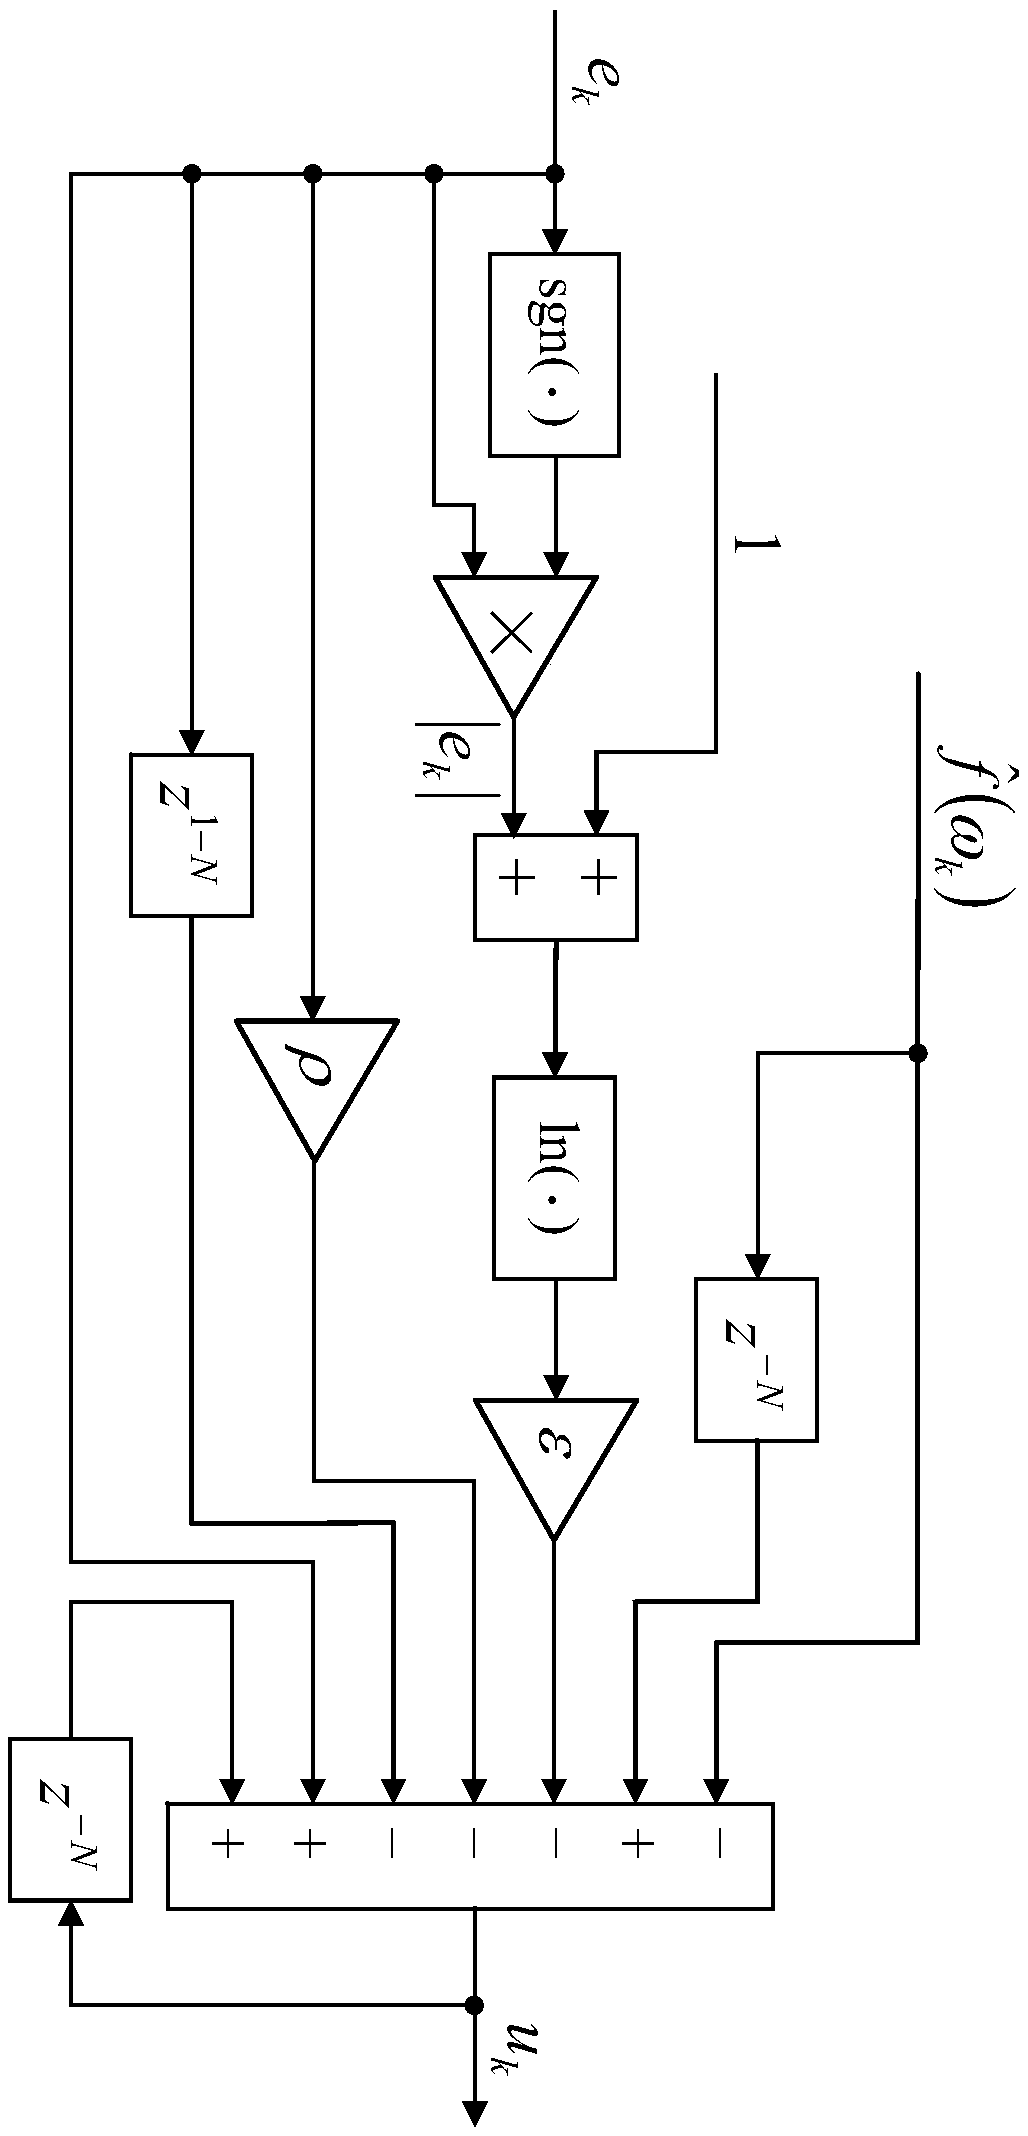 RBF adaptive neural network repetitive controller suitable for repetitive servo system